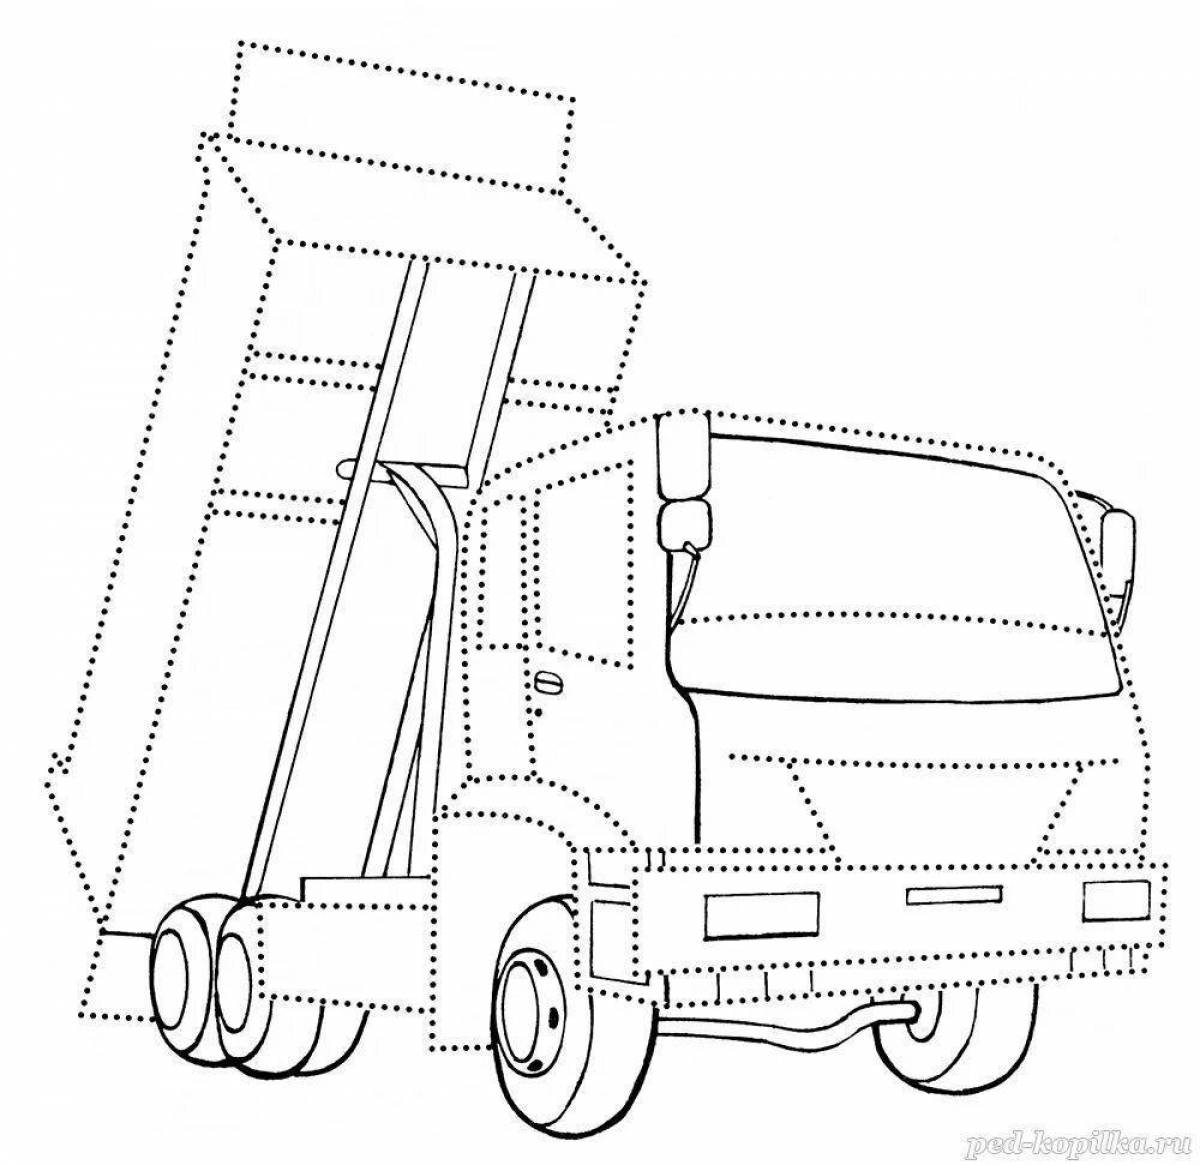 Coloring page adorable truck number